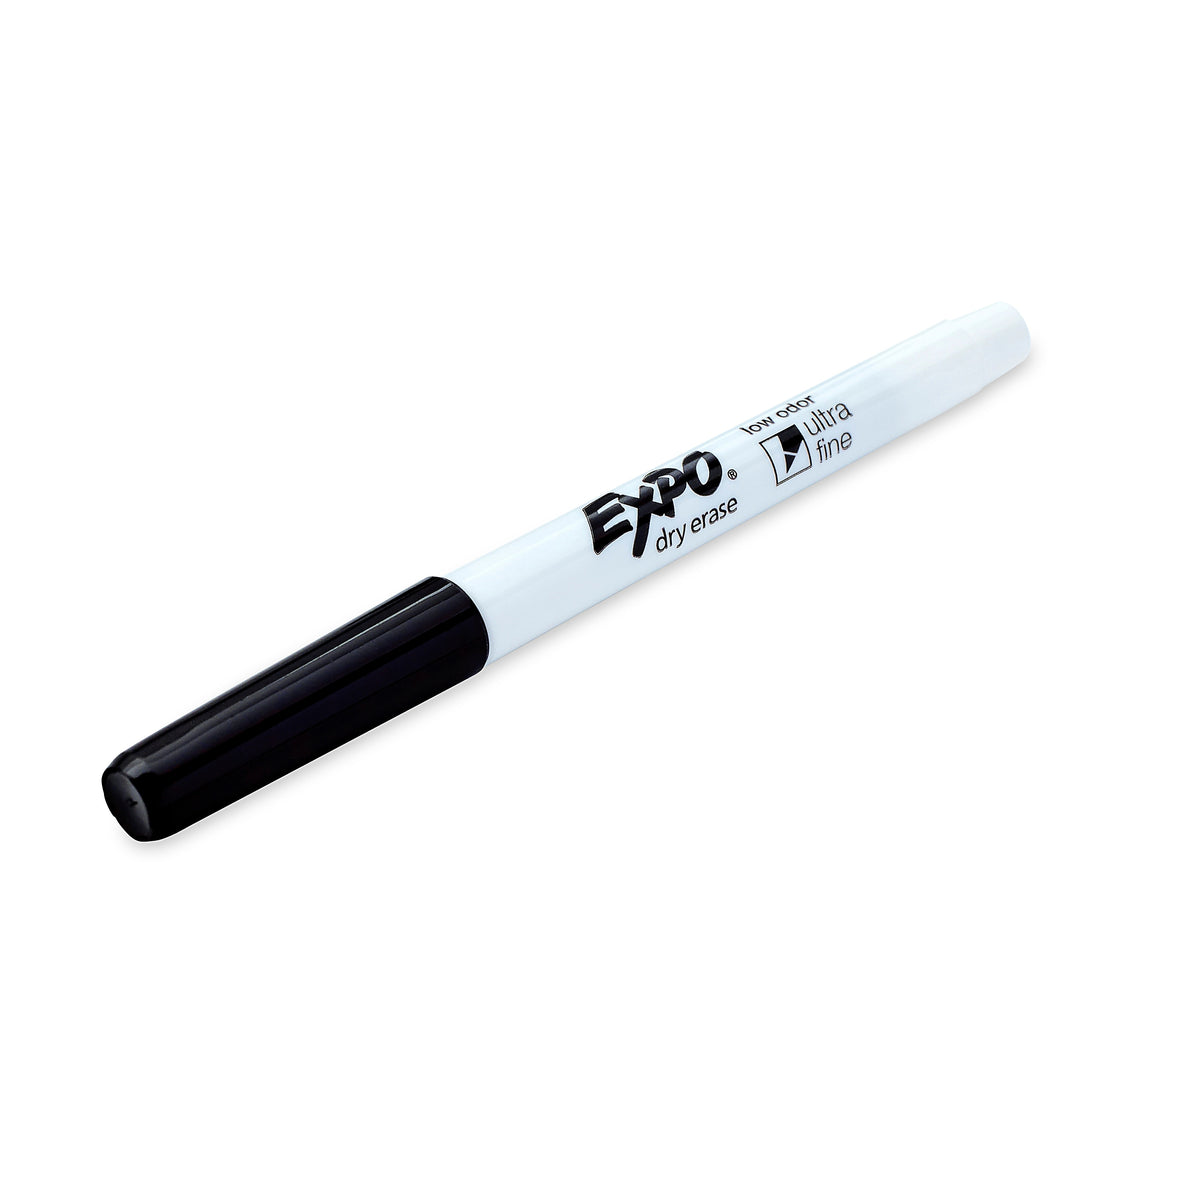 Expo Dry Erase Markers, Ultra Fine Tip, Black, 4/Pack